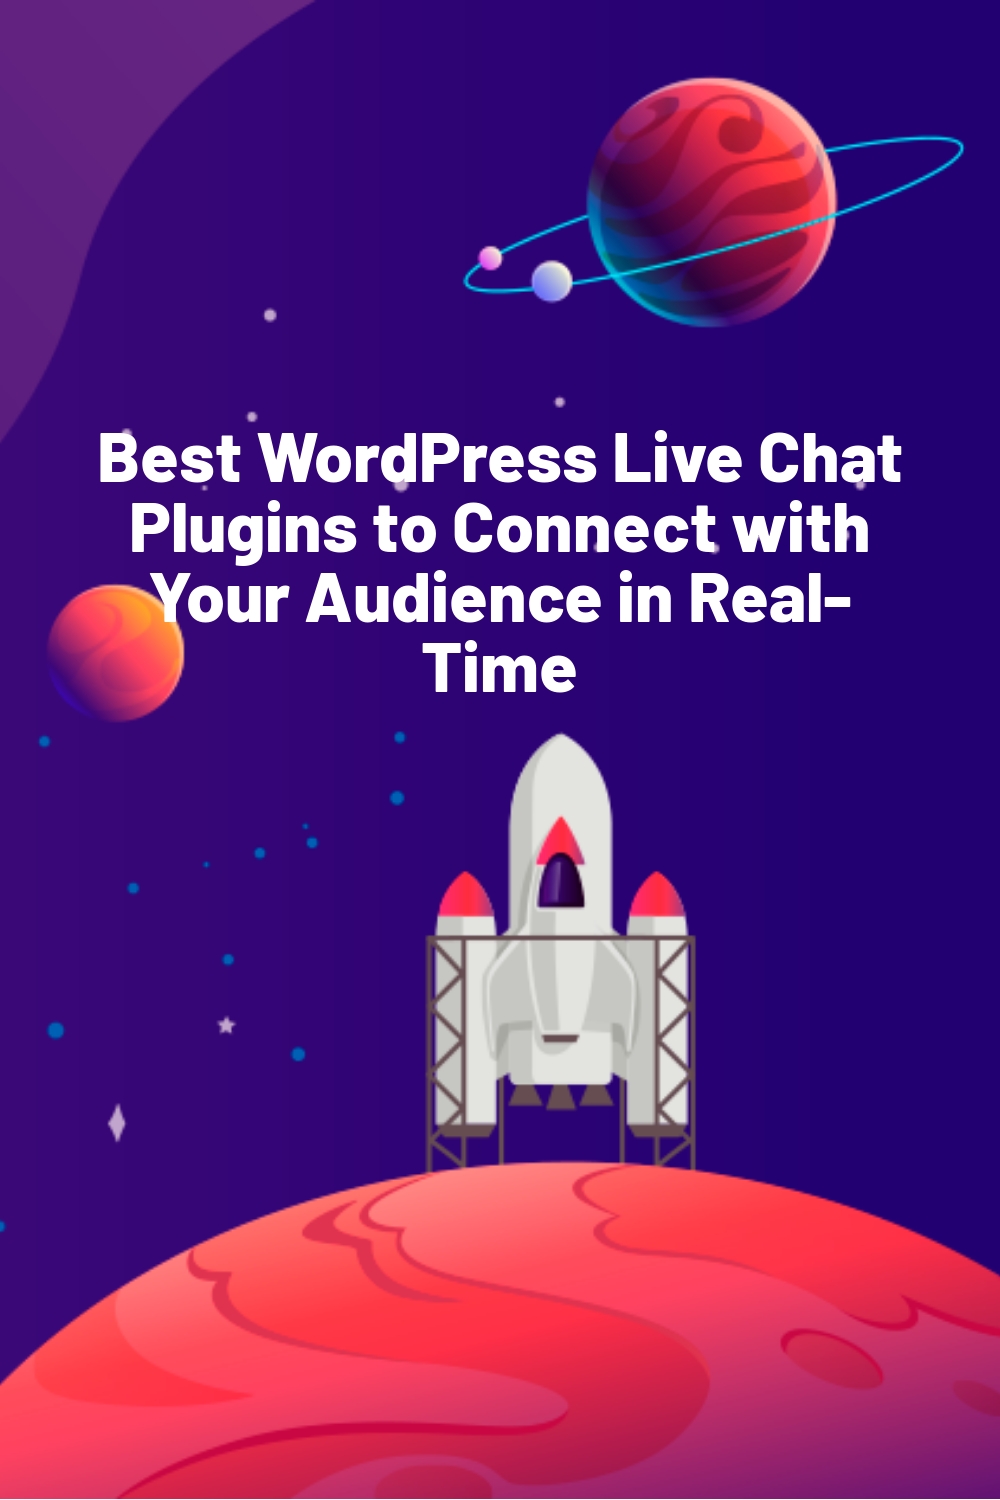 Best WordPress Live Chat Plugins to Connect with Your Audience in Real-Time